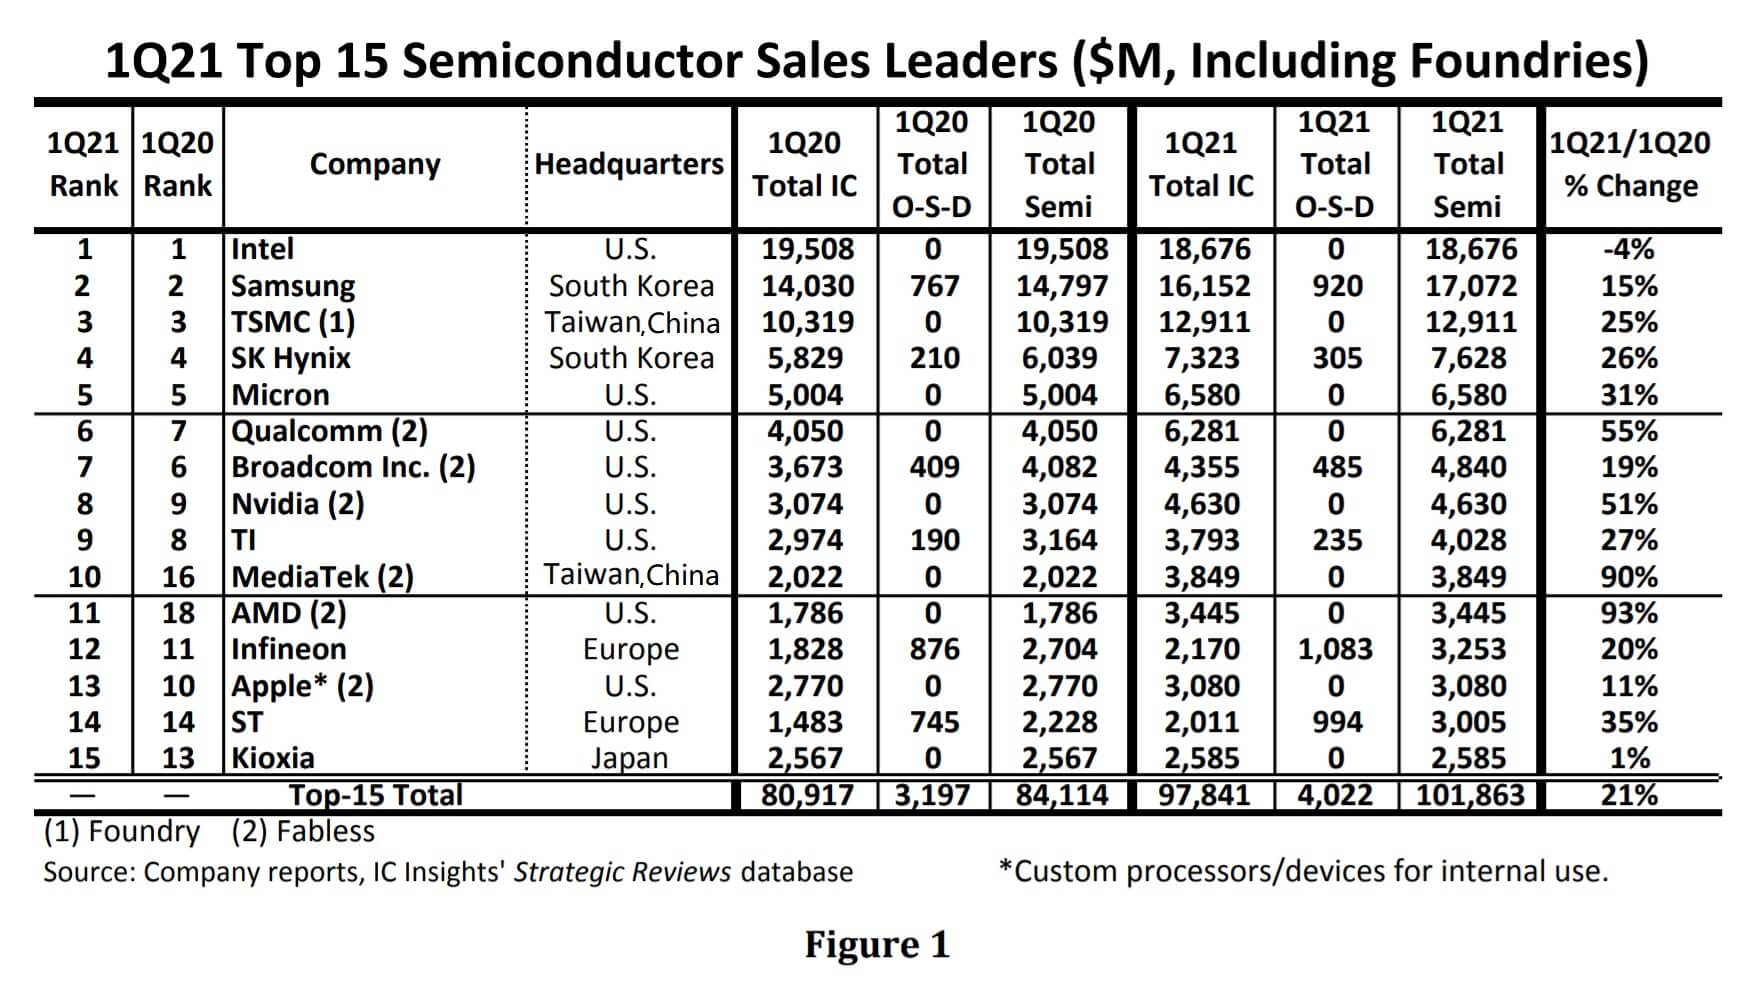 Top-15 Semiconductor companies log YoY growth of 21% in 1Q21-SemiMedia